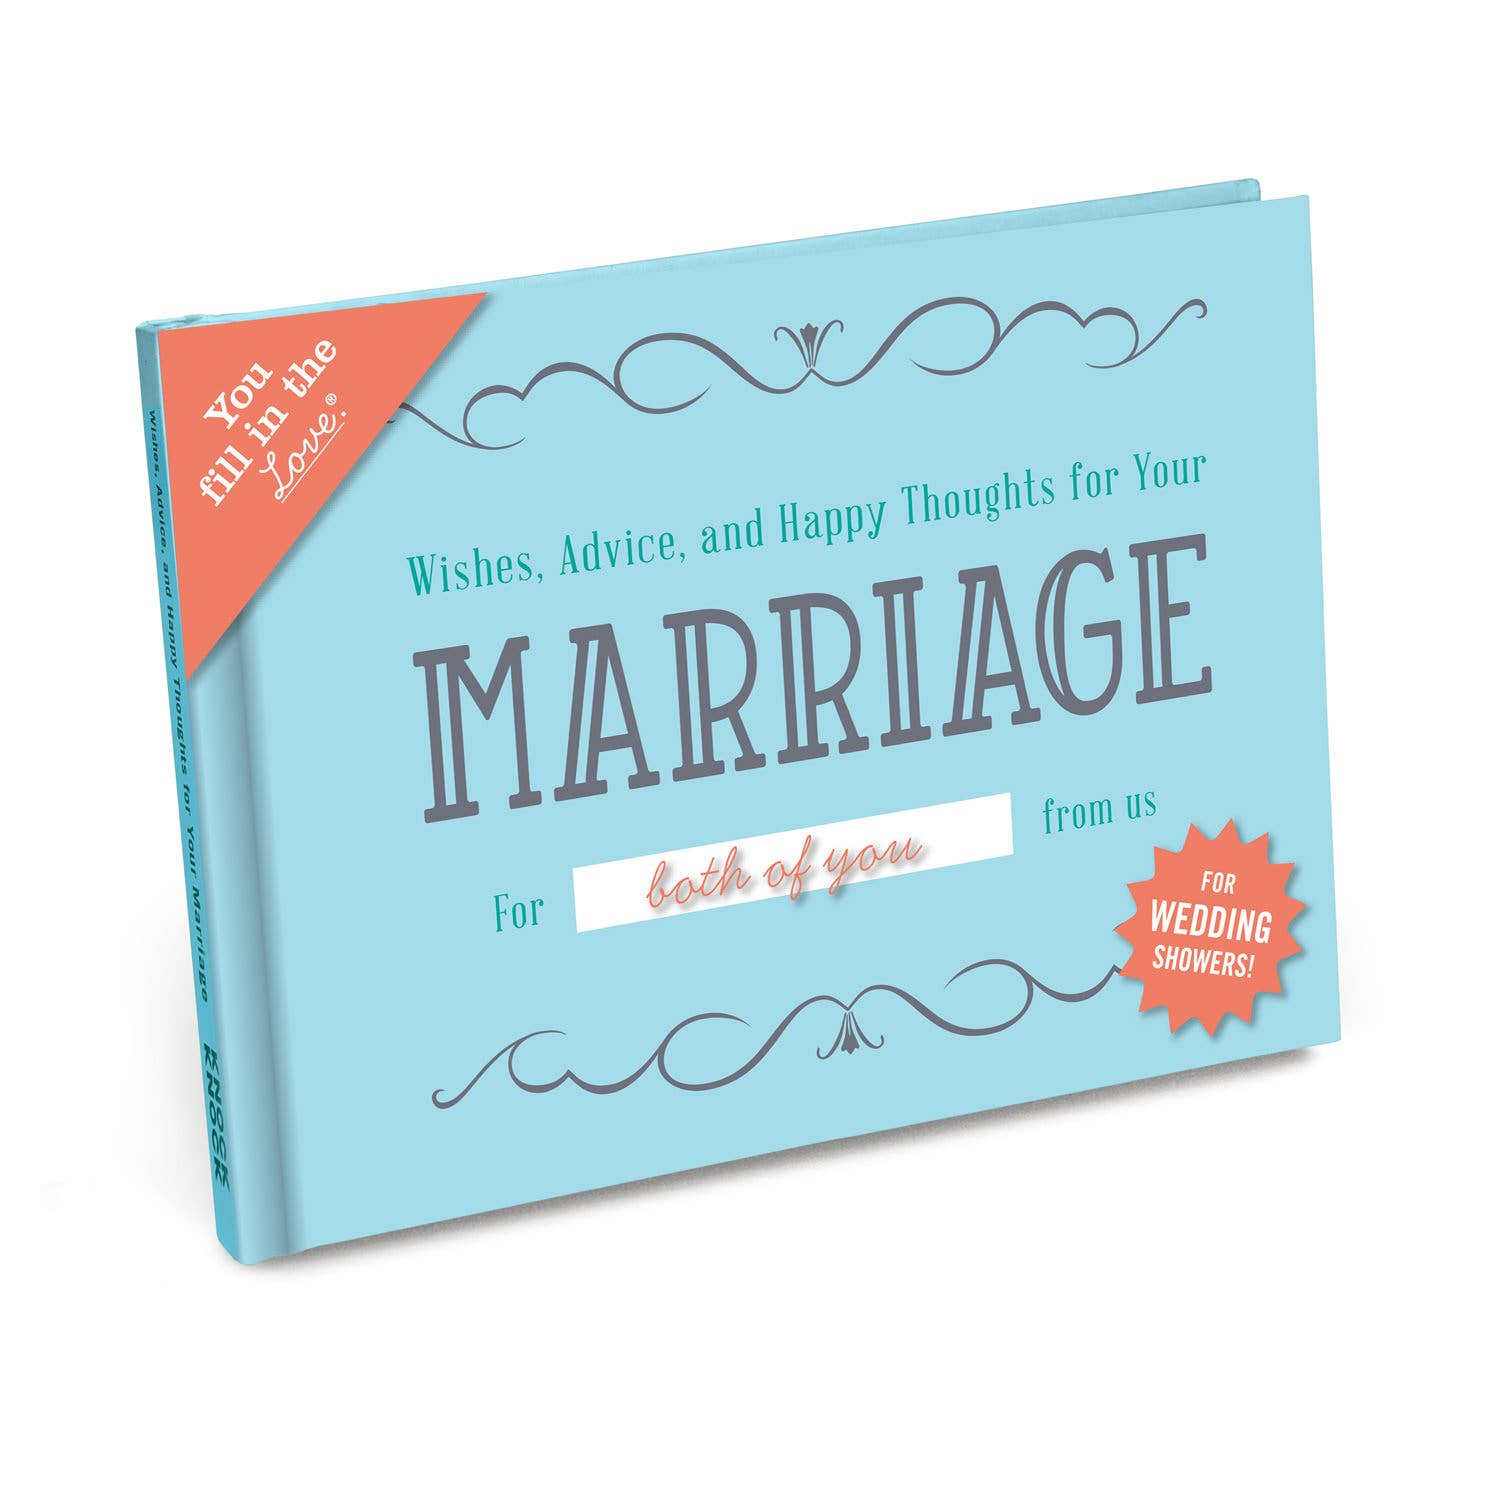 Wishes, Advice, and Happy Thoughts for Your Marriage Wedding Shower Fill in the Love Gift Book - Spiral Circle